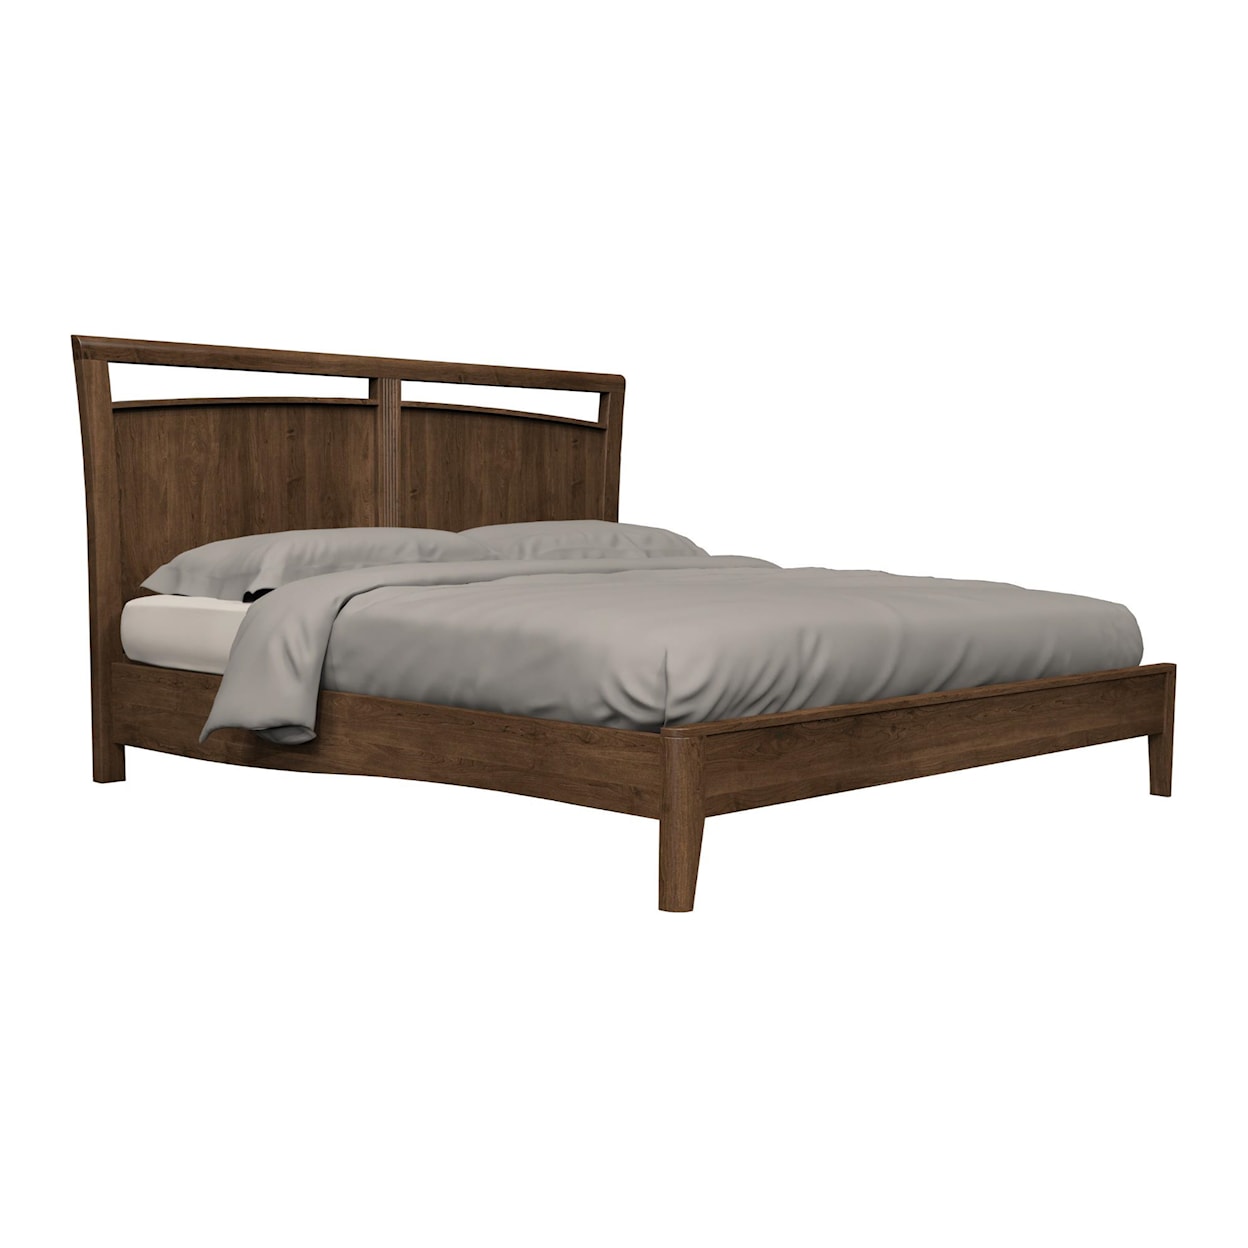 Country View Woodworking Westwood Bedroom California King Bed